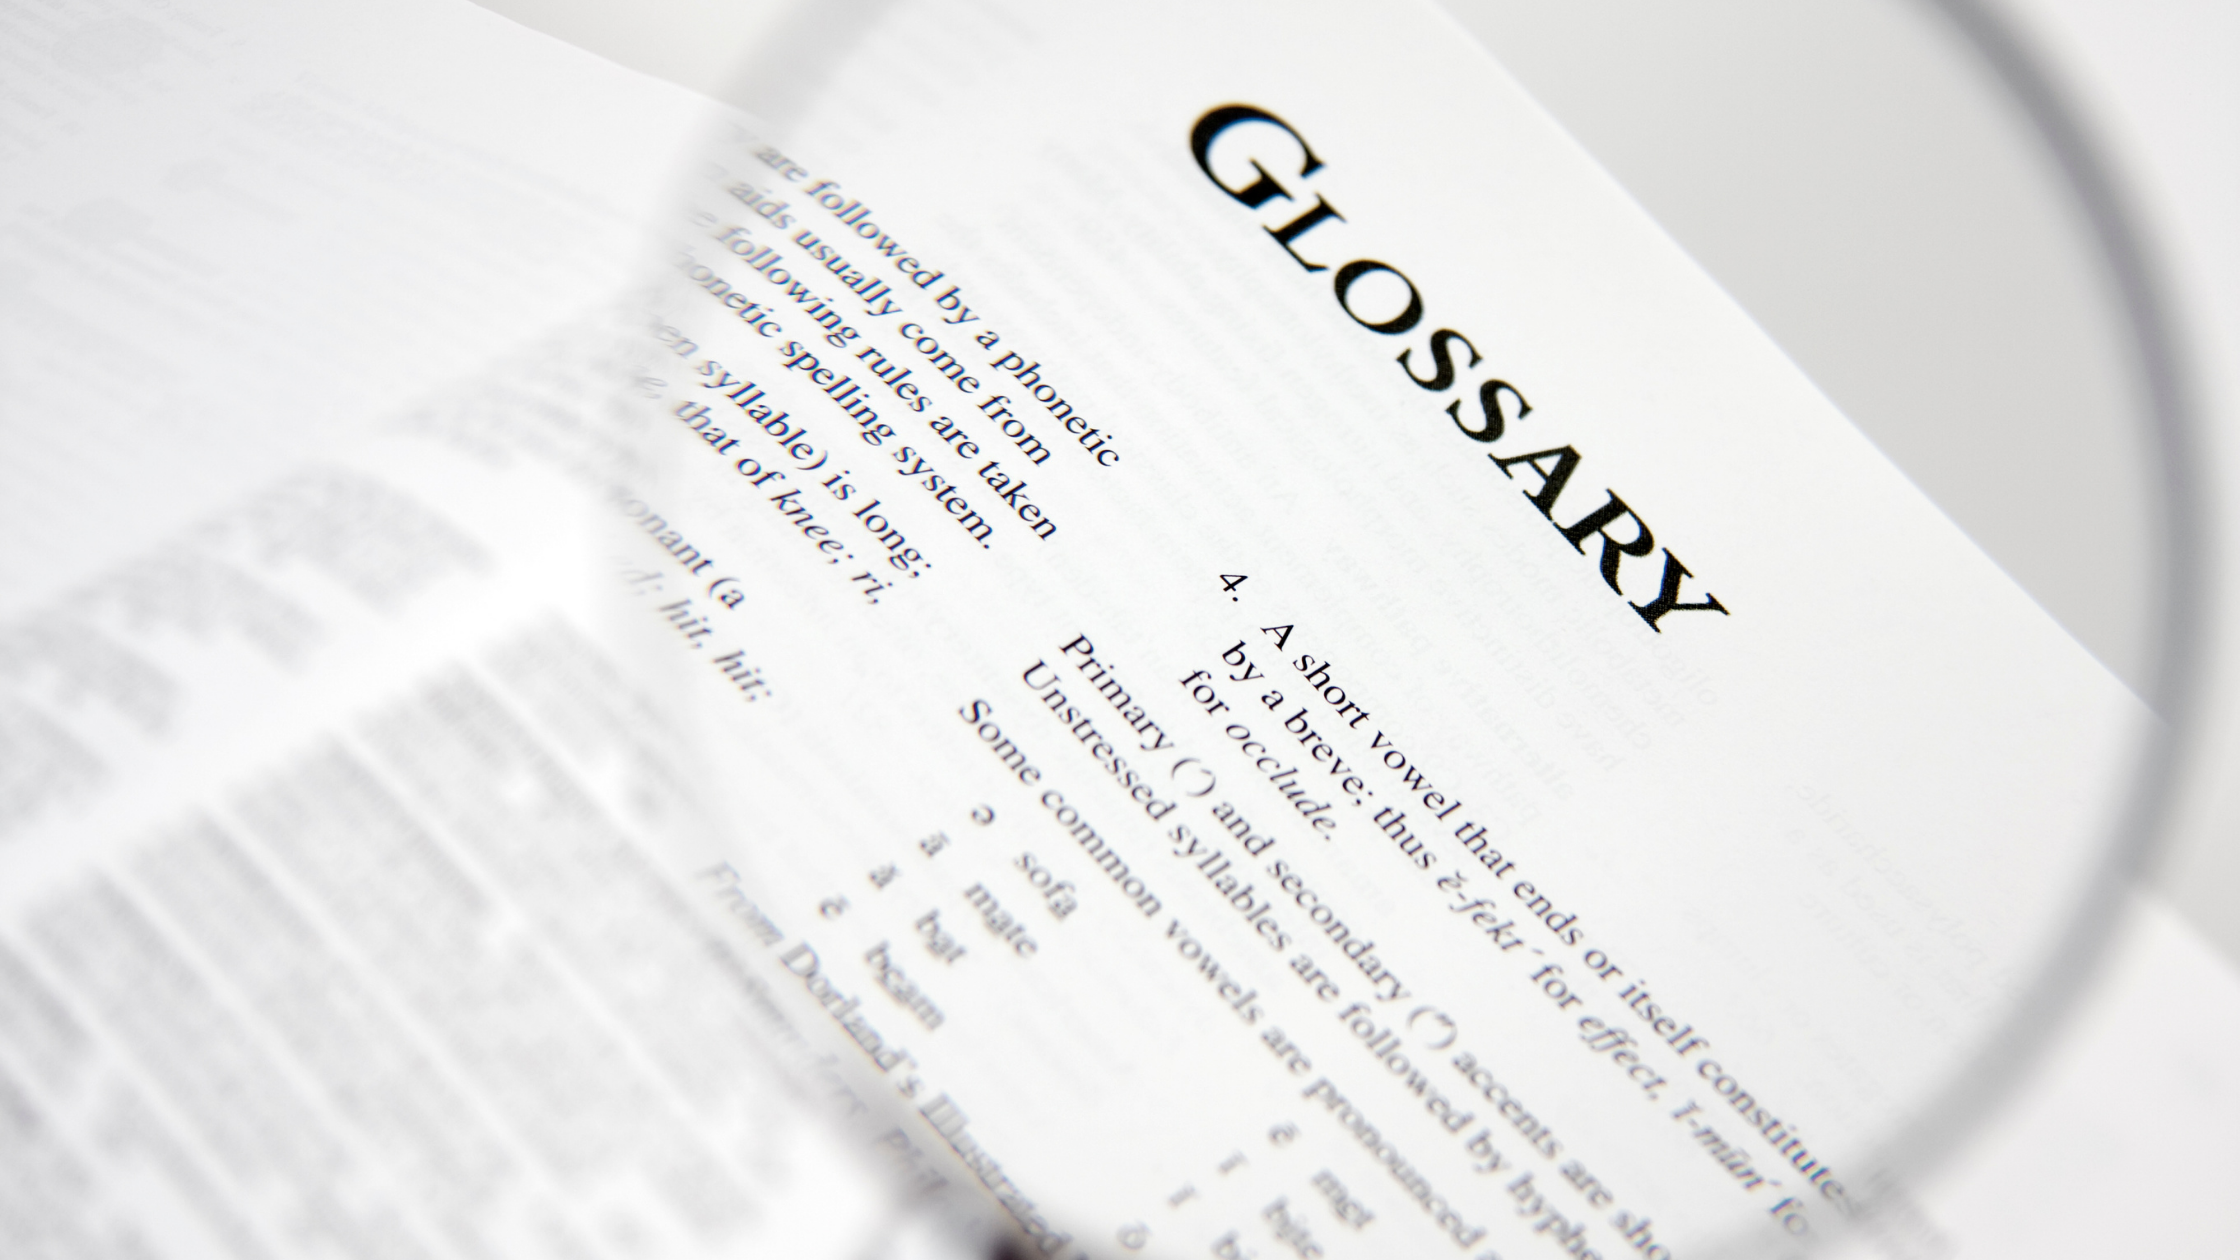 glossary page for kids